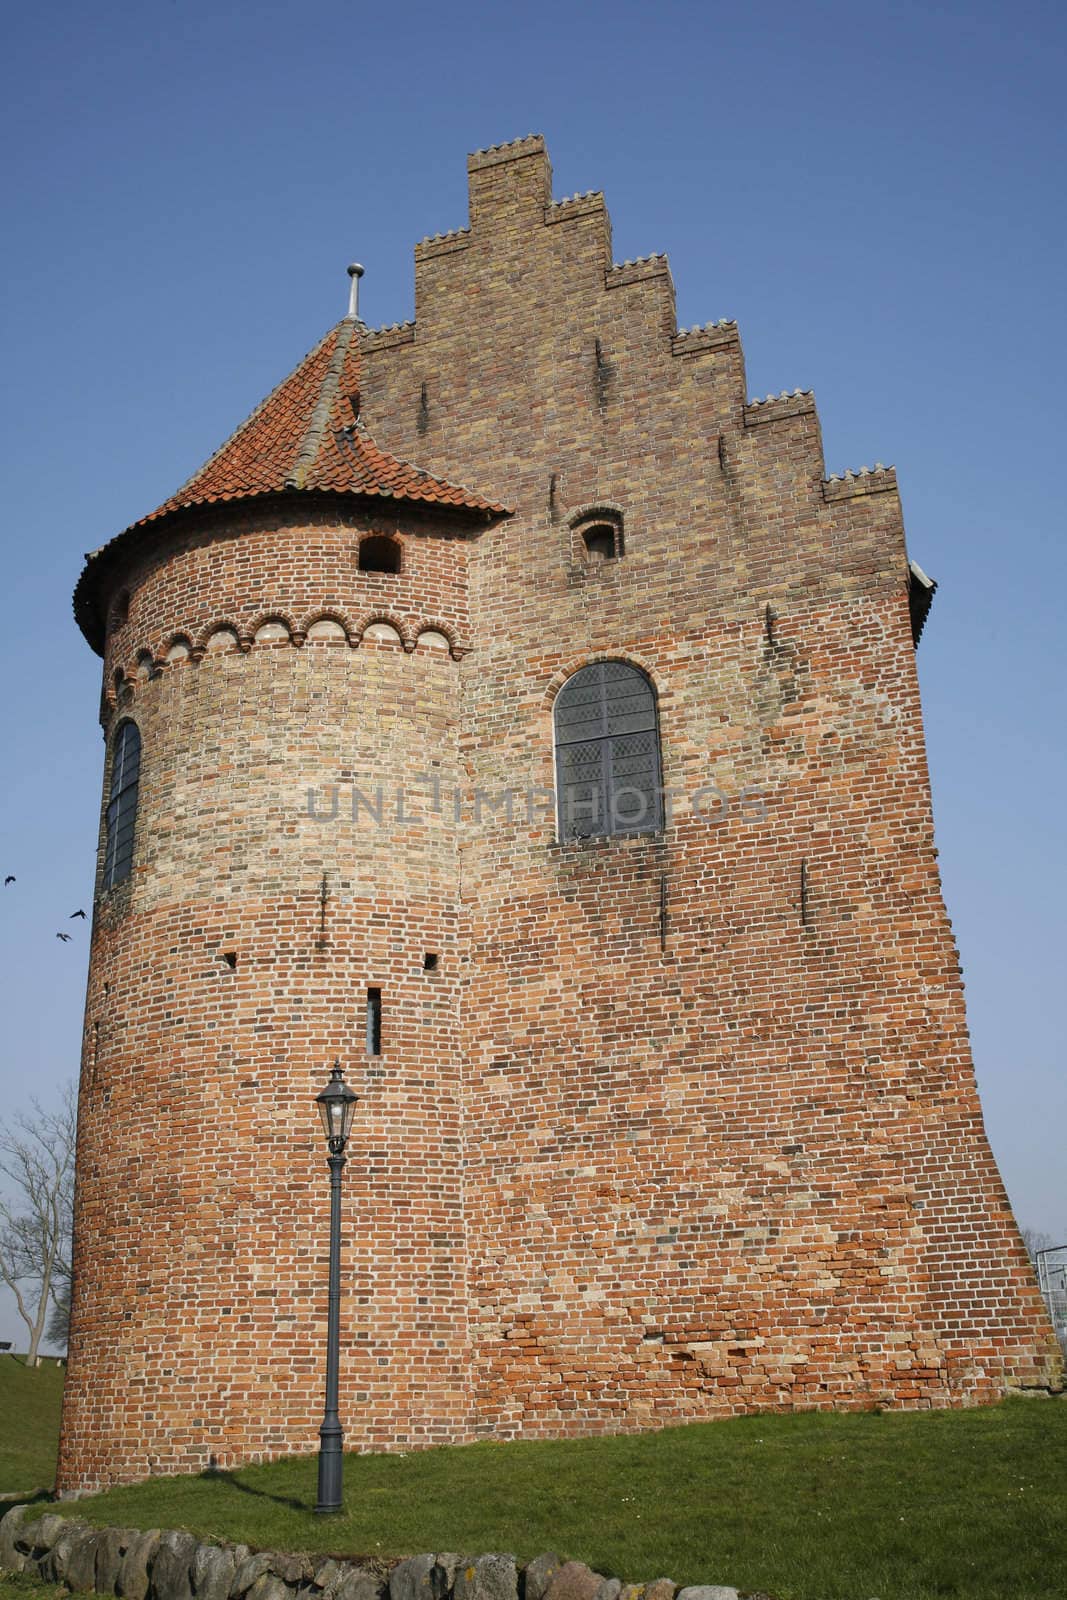 The gable of the 800 years old Nyborg Castle - Denmark.